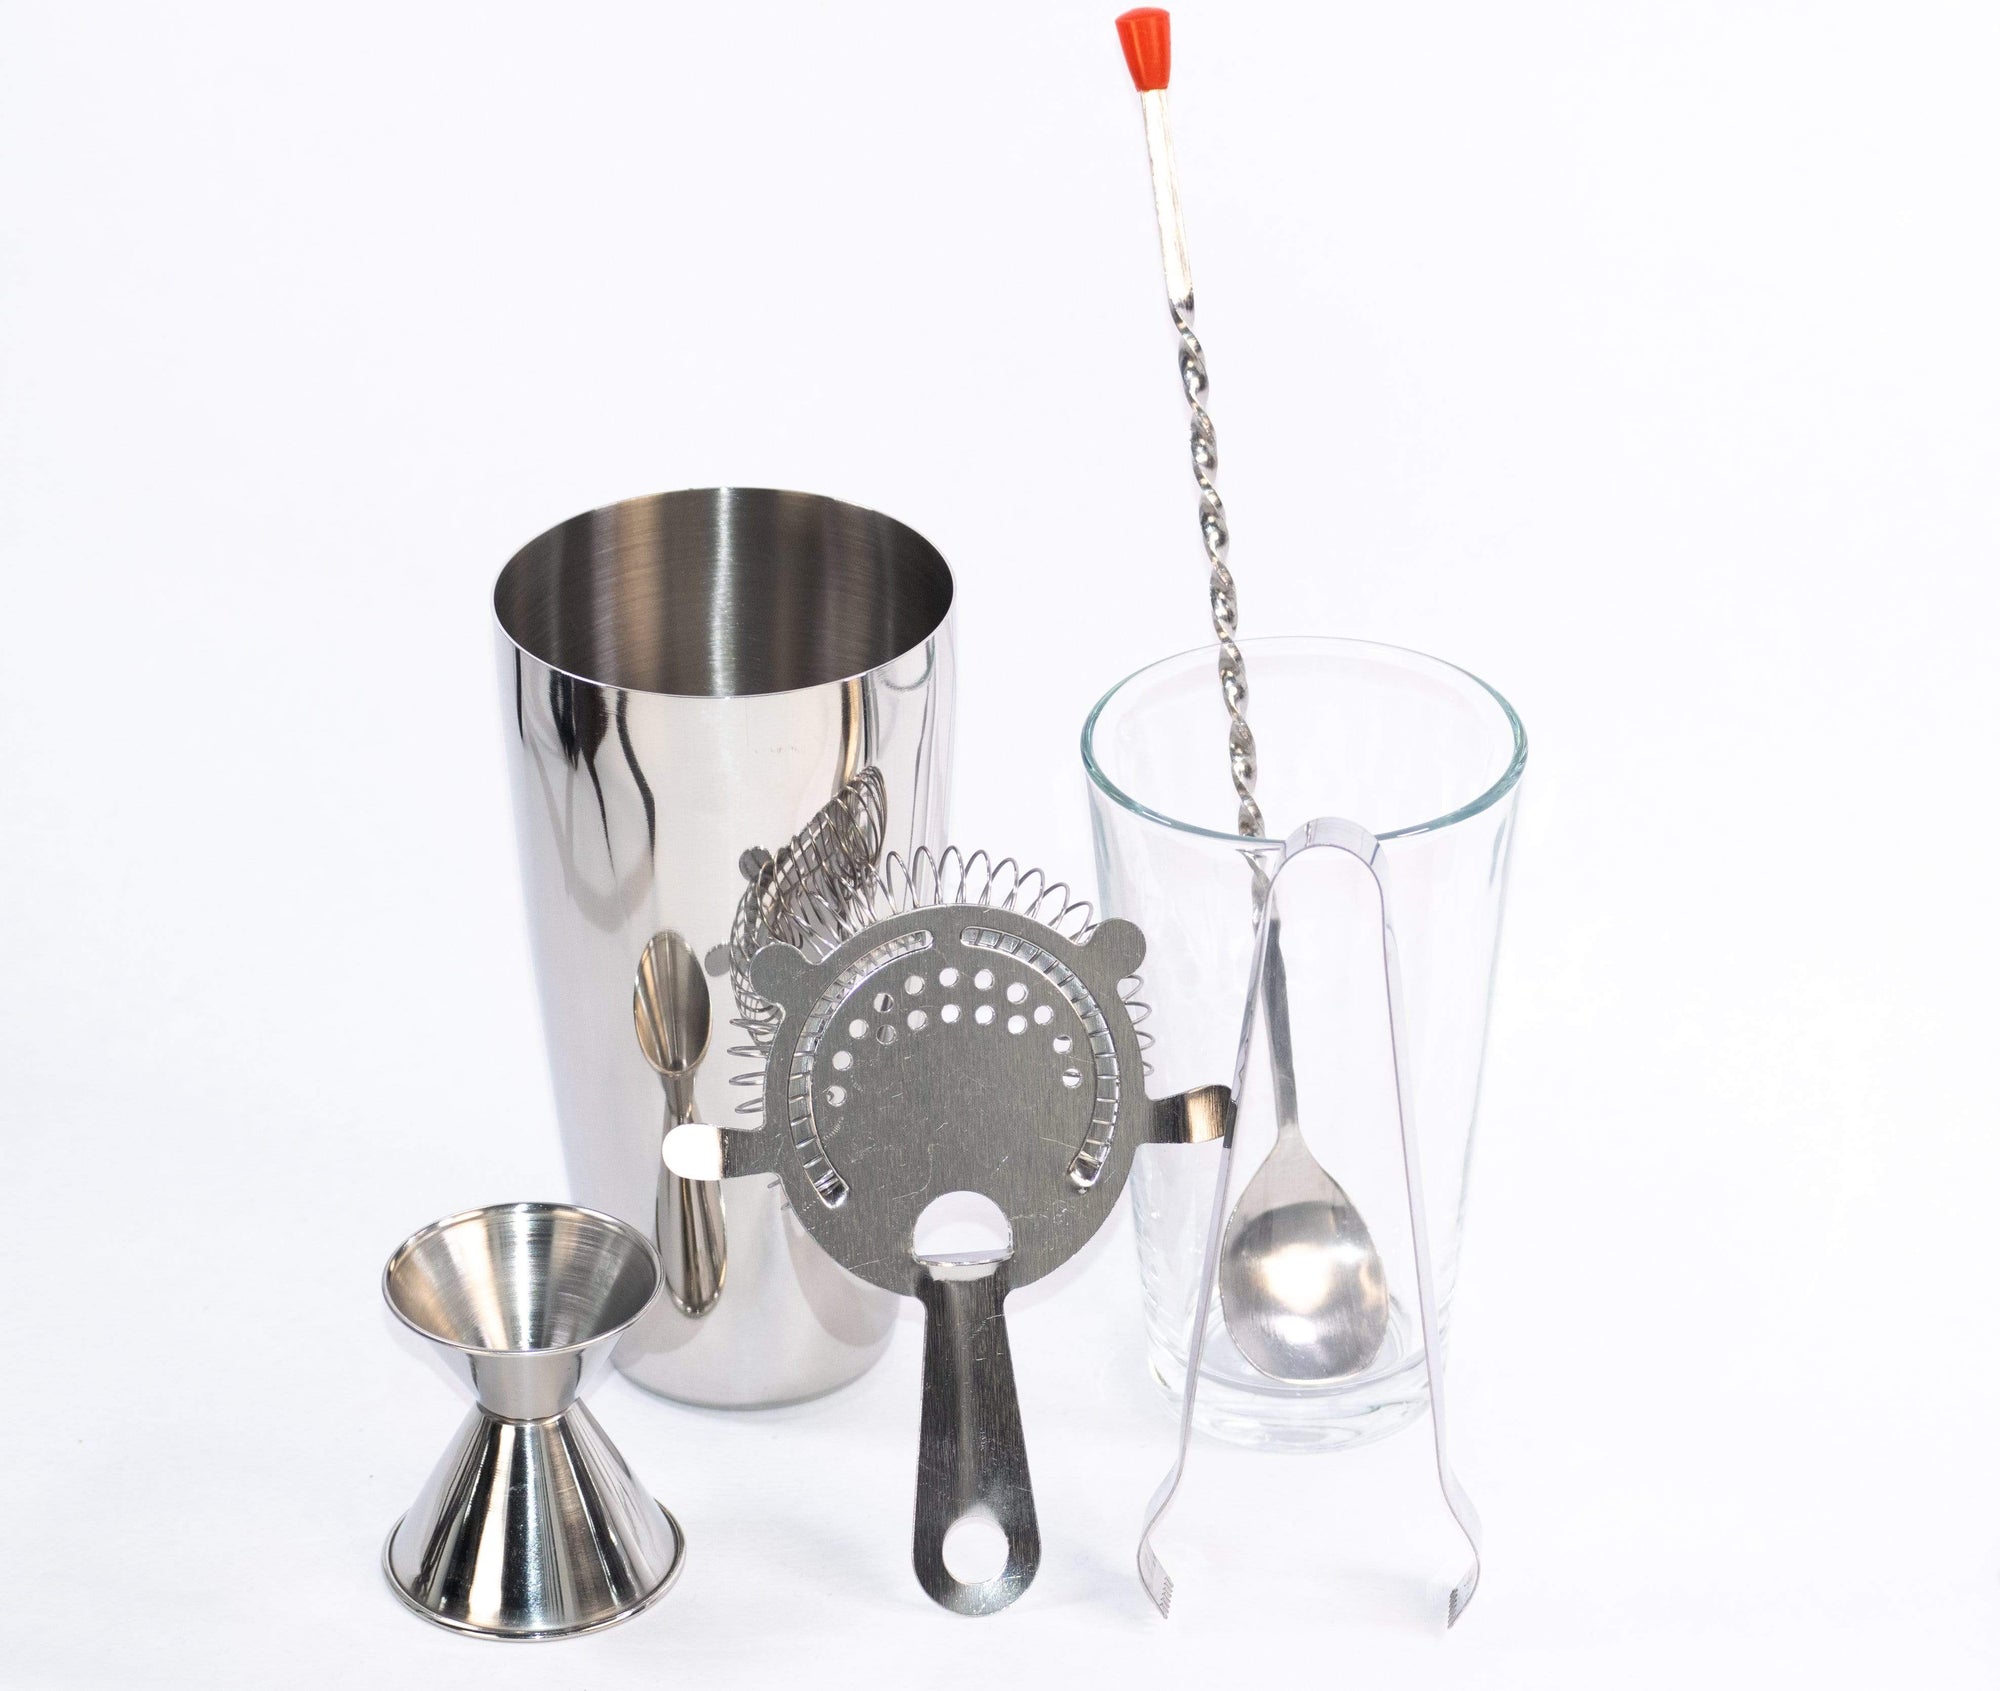 Minimalist cocktail kit featuring strainer, cocktail spoon, jigger, shaker, and ice tongs including everything you need to make all your favorite cocktails at home